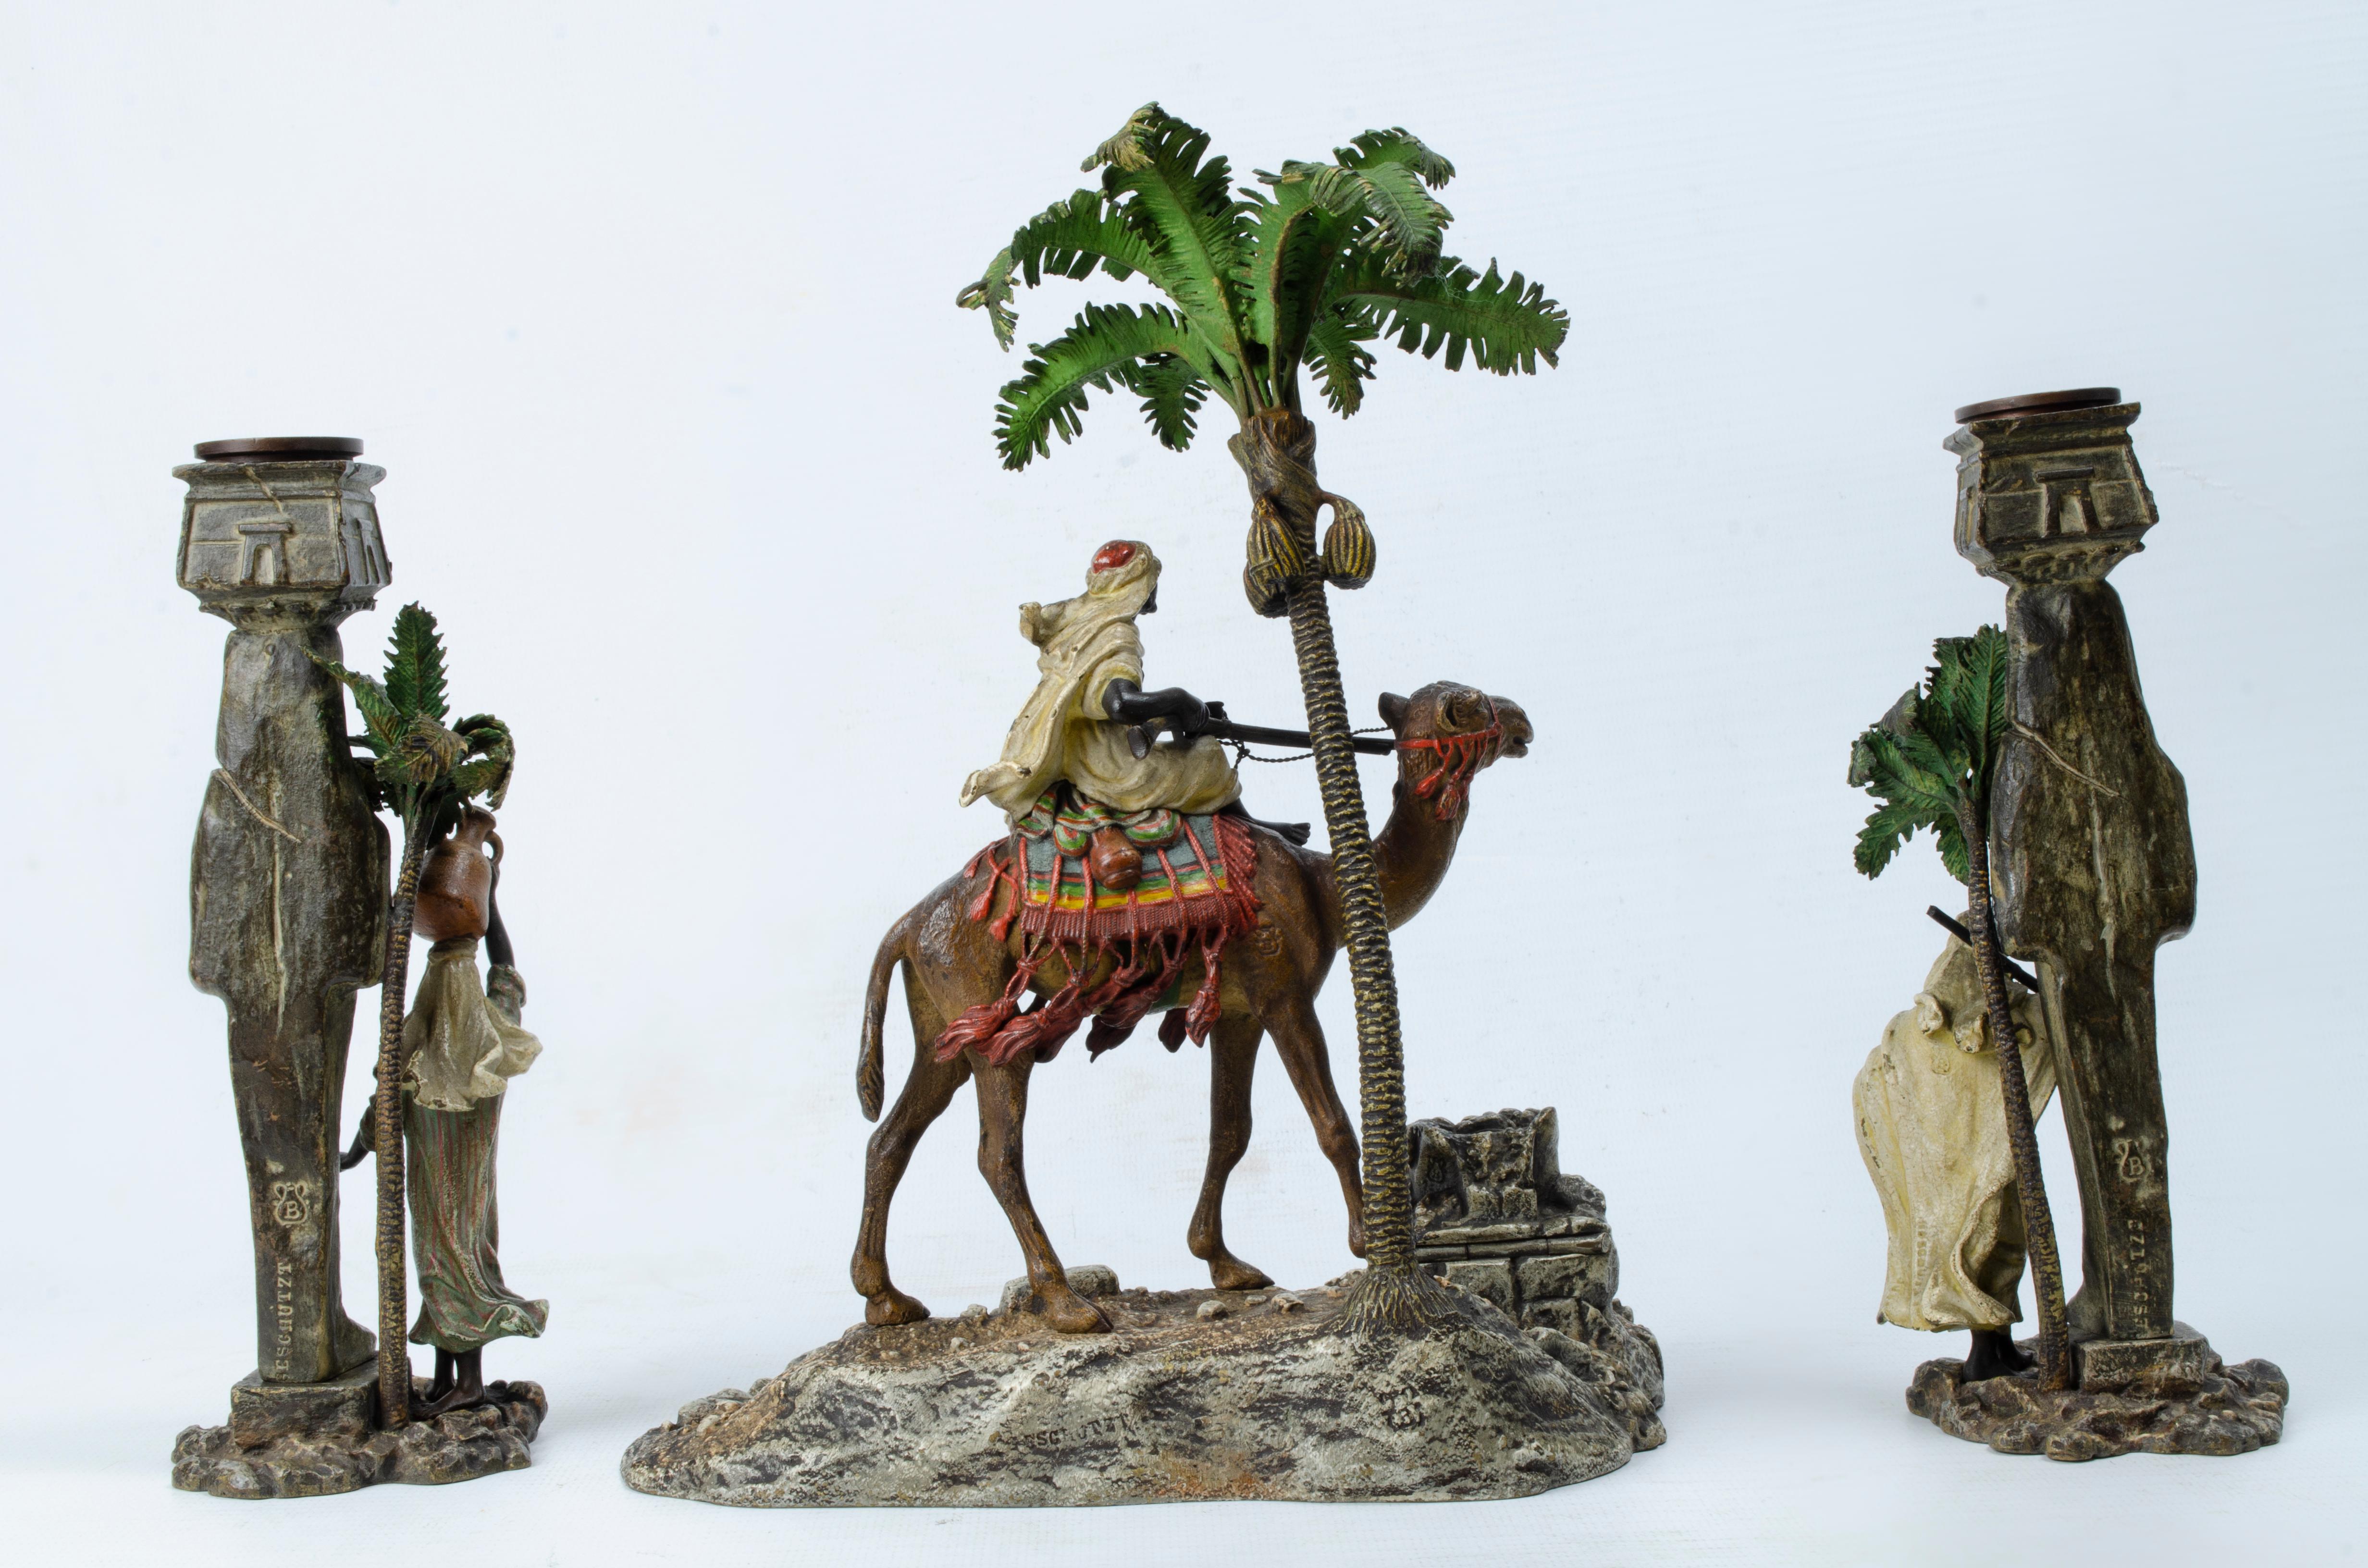 Arabic themed garniture made by Franz Xavier Bergman (1861-1936). The pieces are made of polychrome bronze. The central one is an inkwell that is hidden among the rocks and a warrior Arab man riding a camel next to a beautiful palm tree. The totems